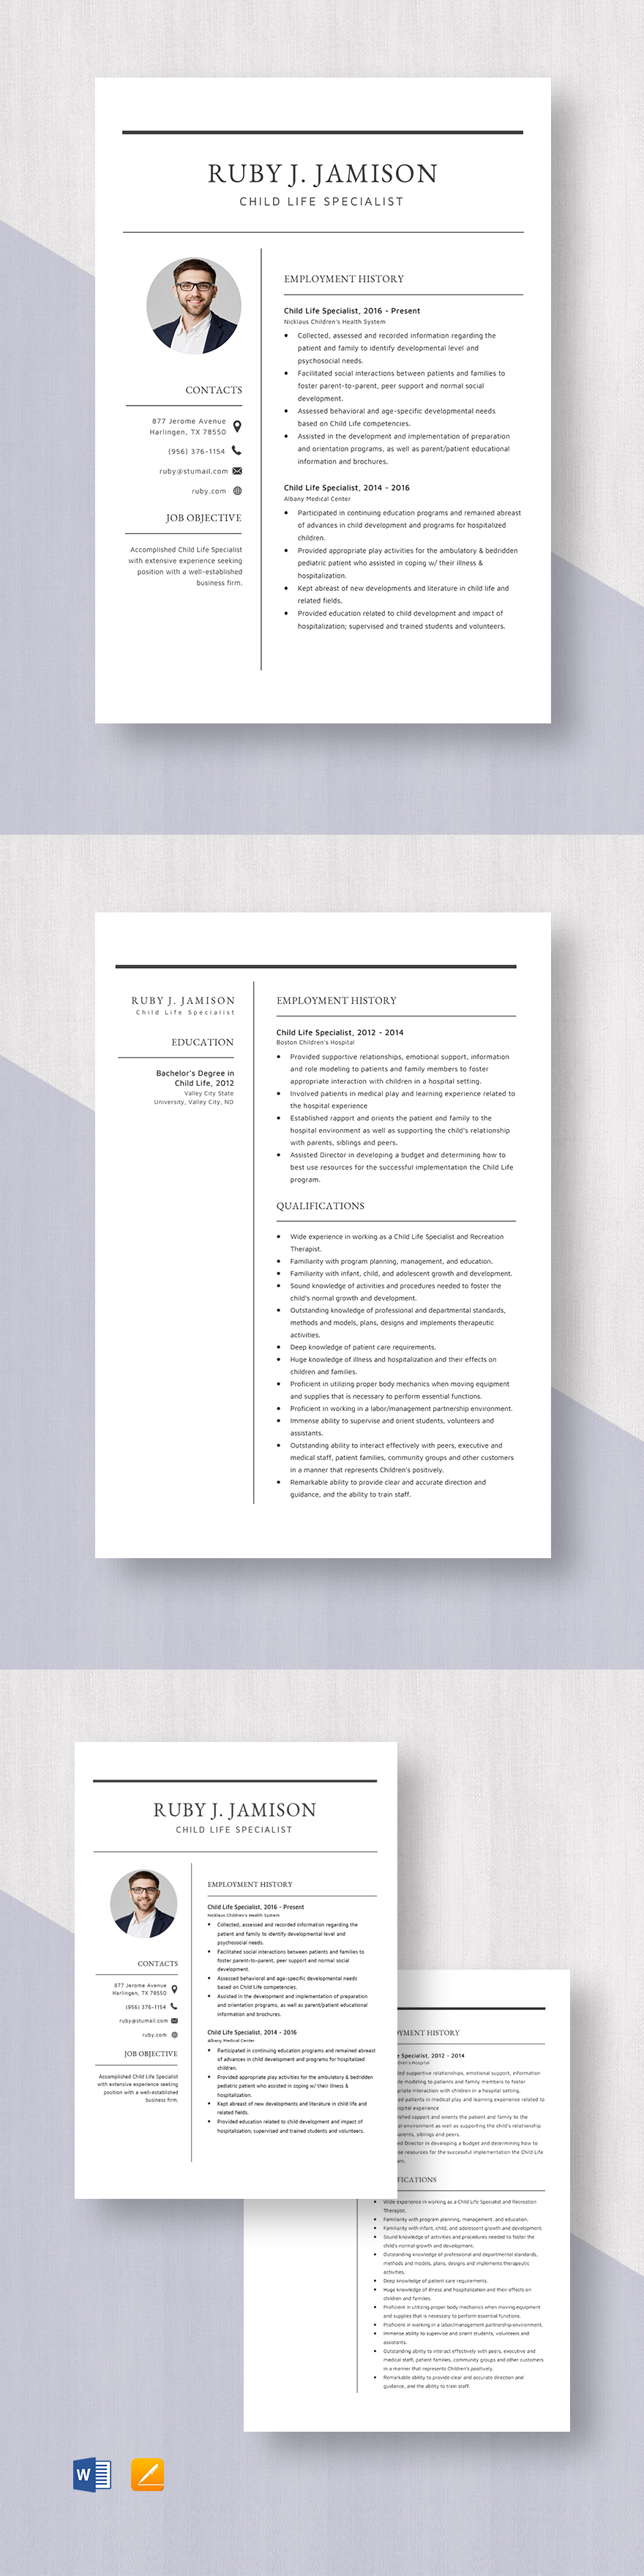 Free Child Life Specialist Resume Template